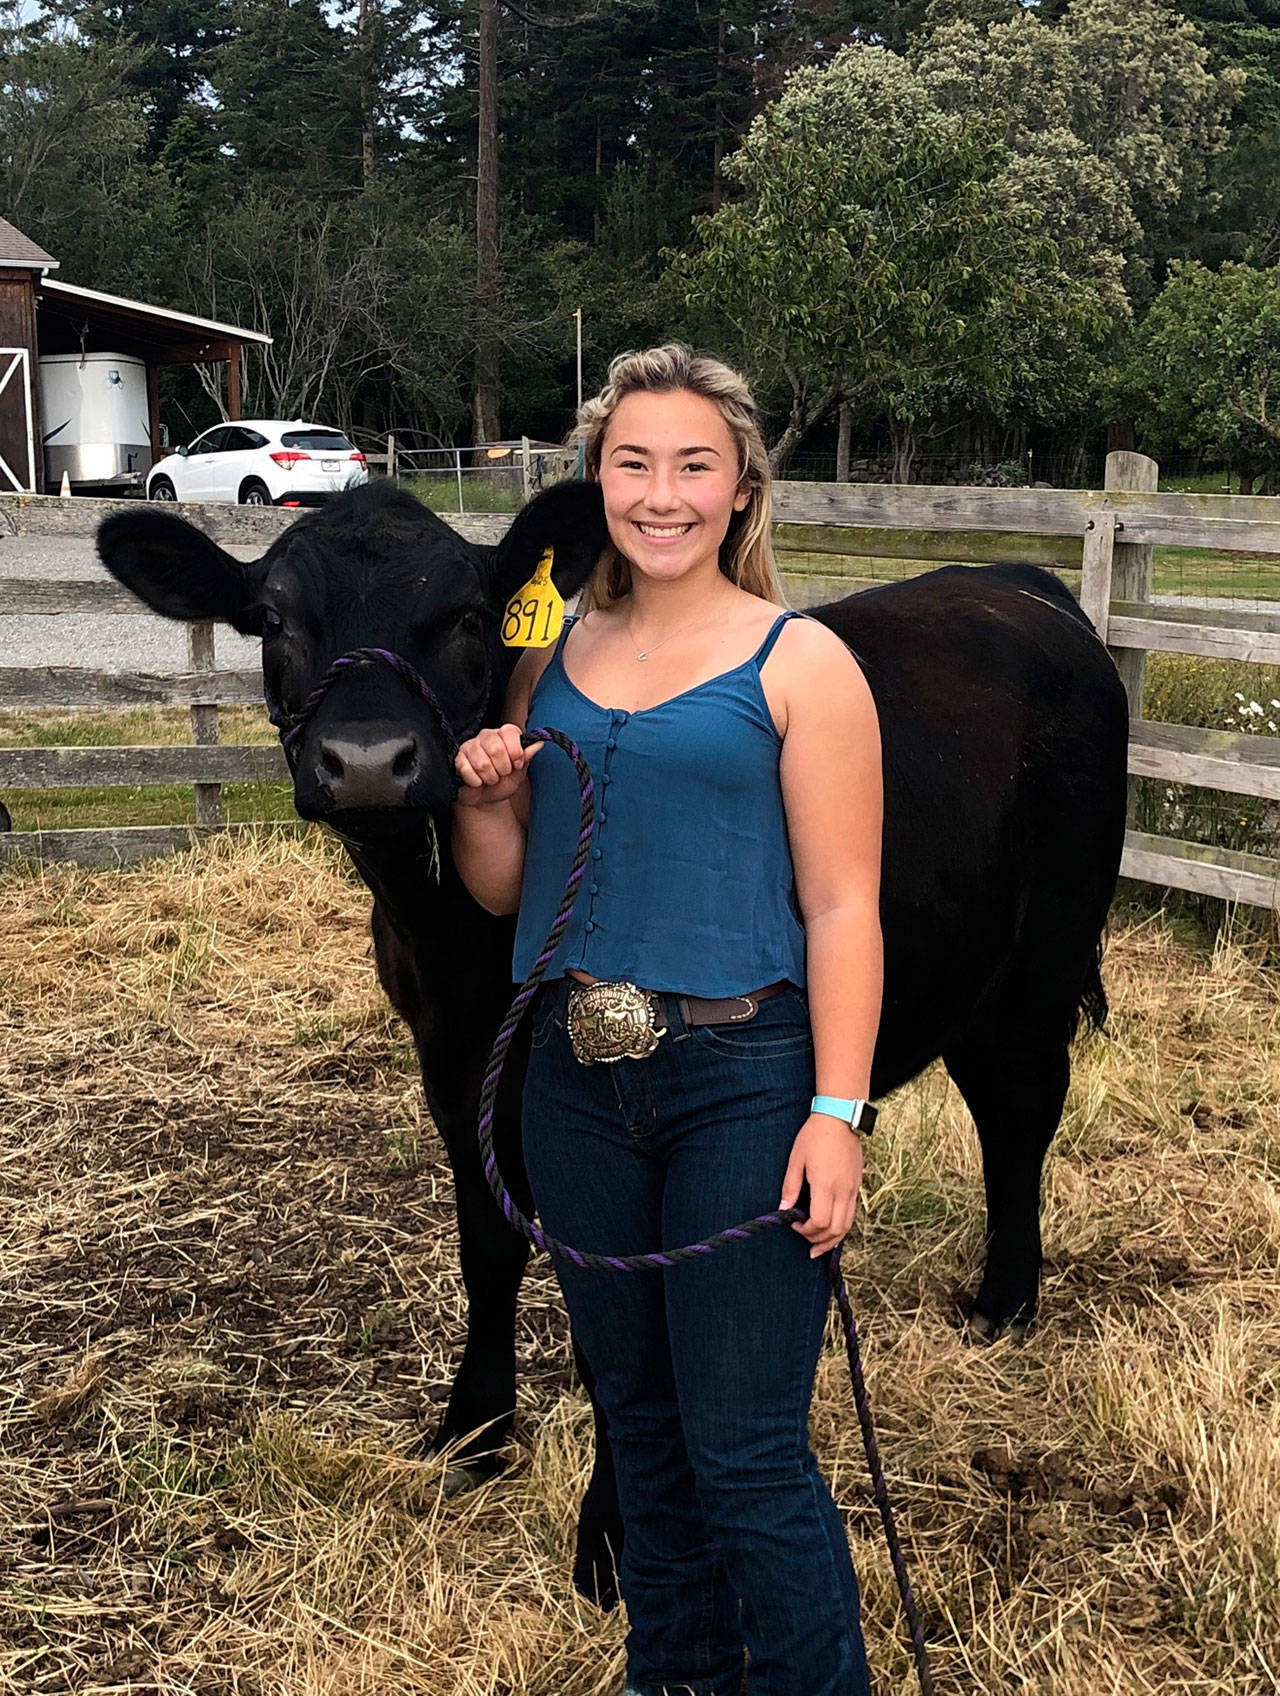 Camden Miller with her steer, Jimmy. Miller purchased Jimmy in December when he was 6 months old. In past years, Miller participated in various 4-H classes at the fair with her horses and is excited to try something new this year, she said. (Photo provided)